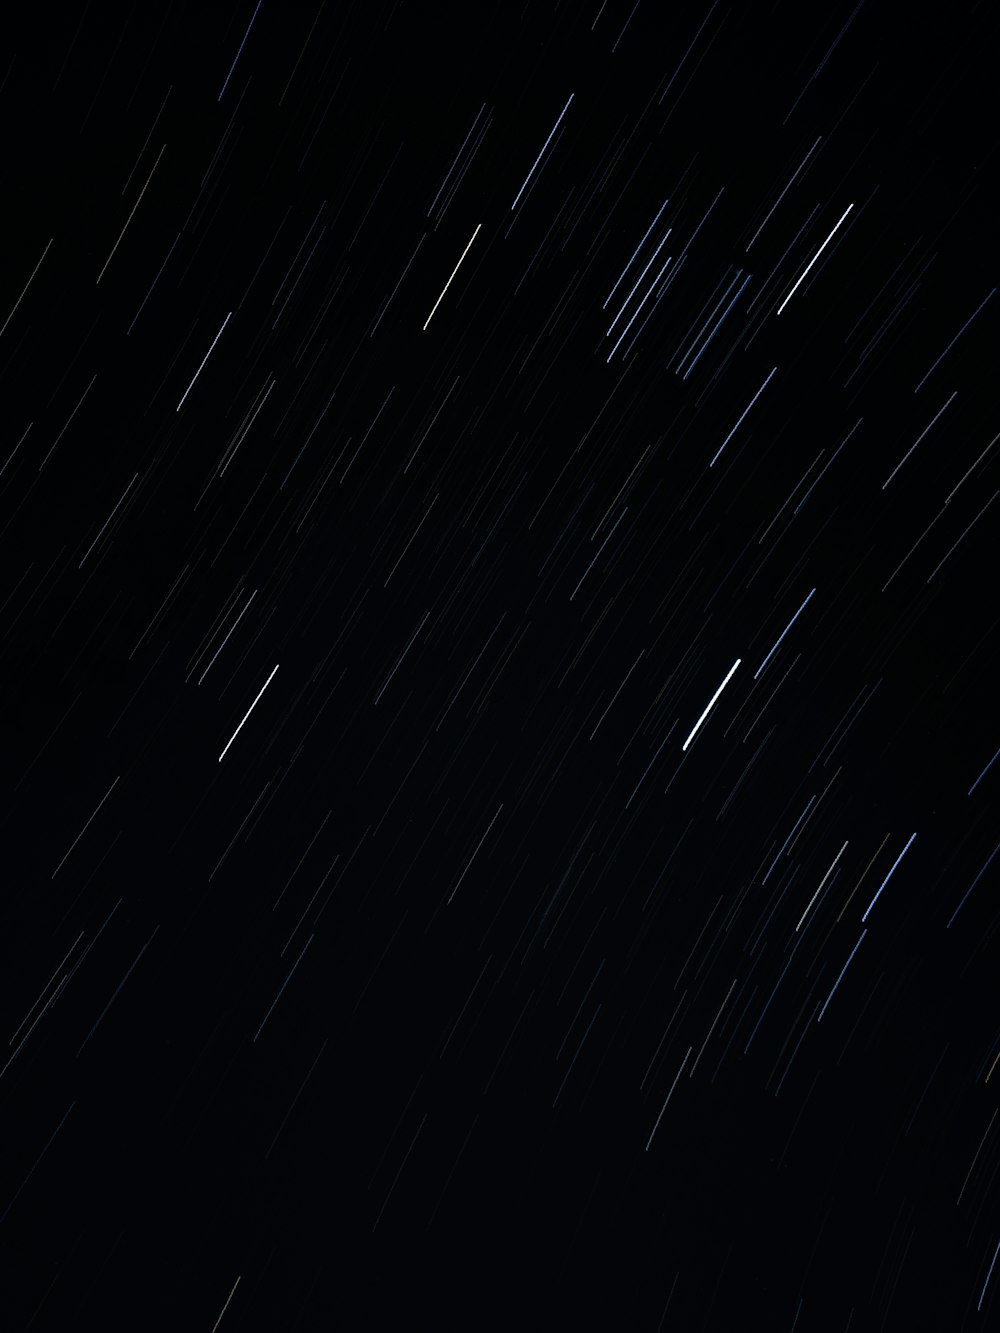 the night sky is full of star trails